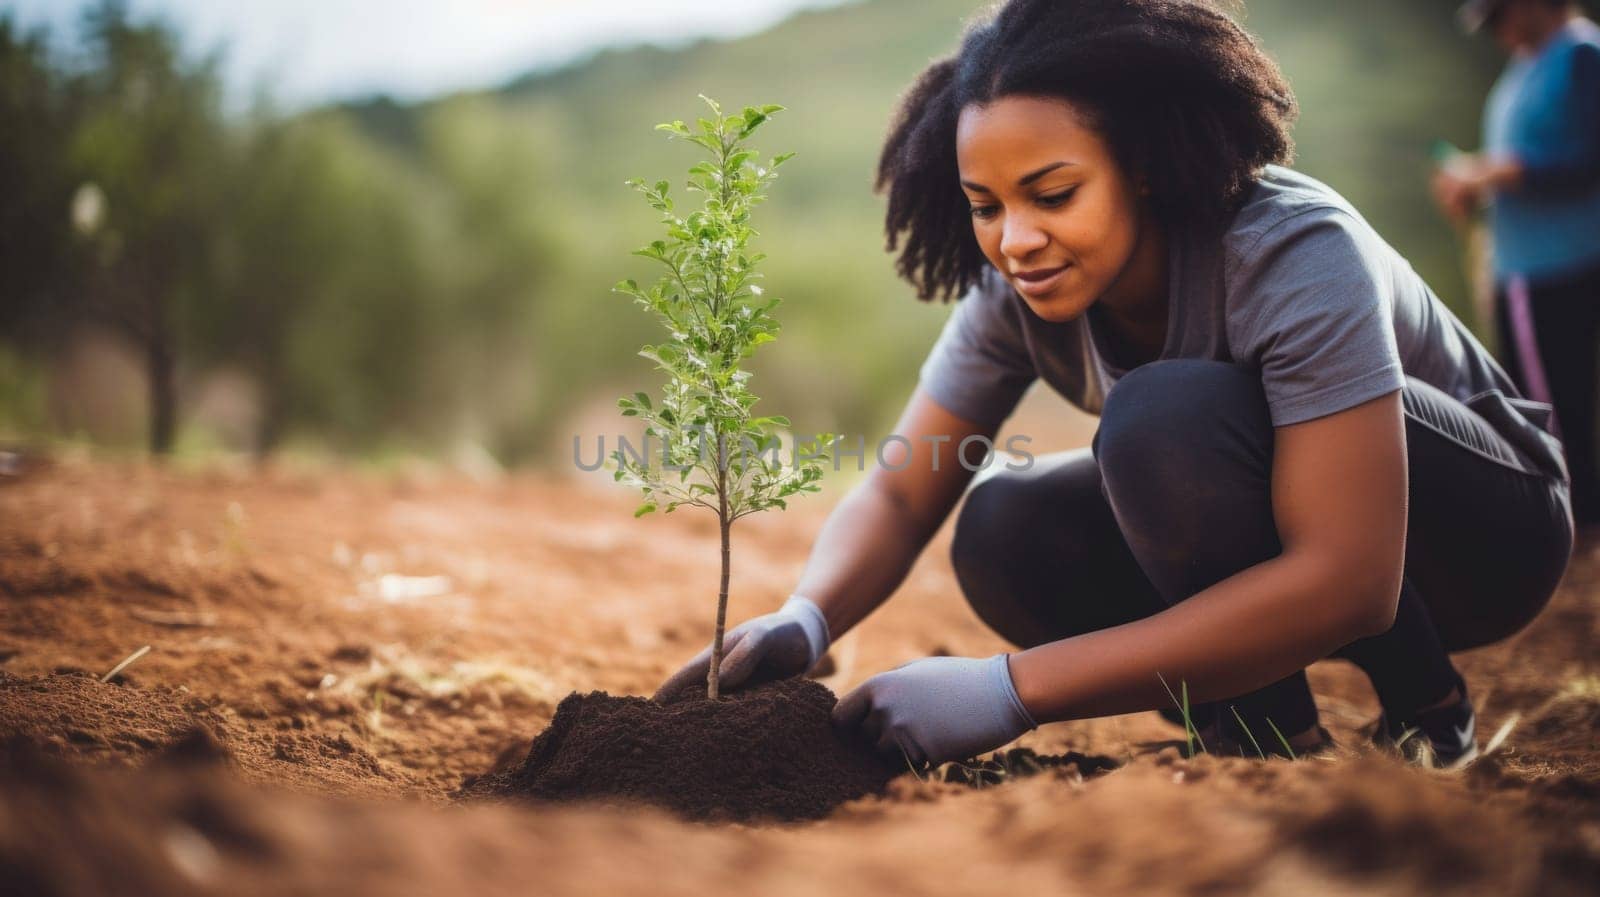 Happy afro american girl planting a tree. Earth protection and sustainability concept.